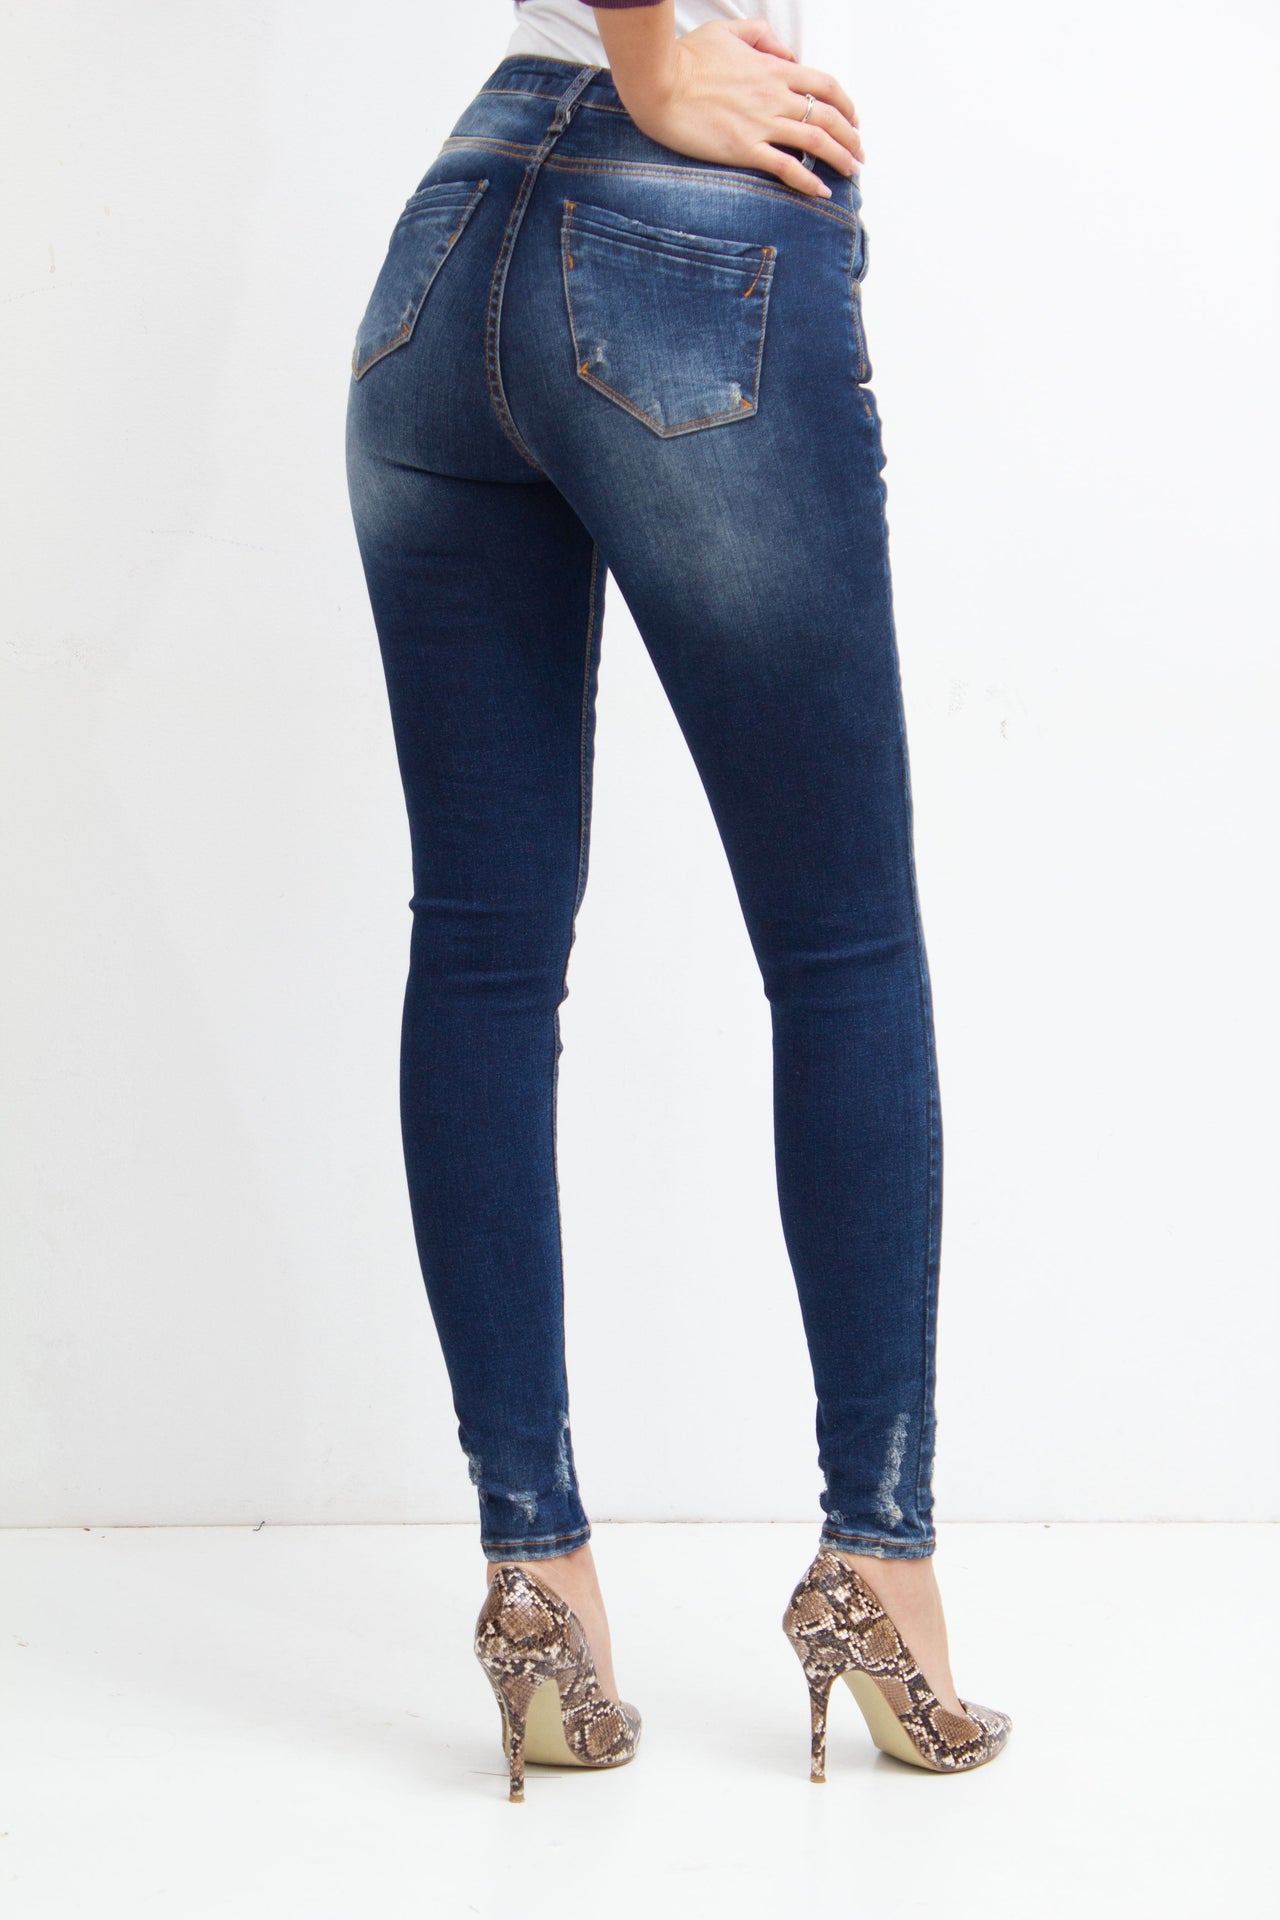 Athens Jeans-1